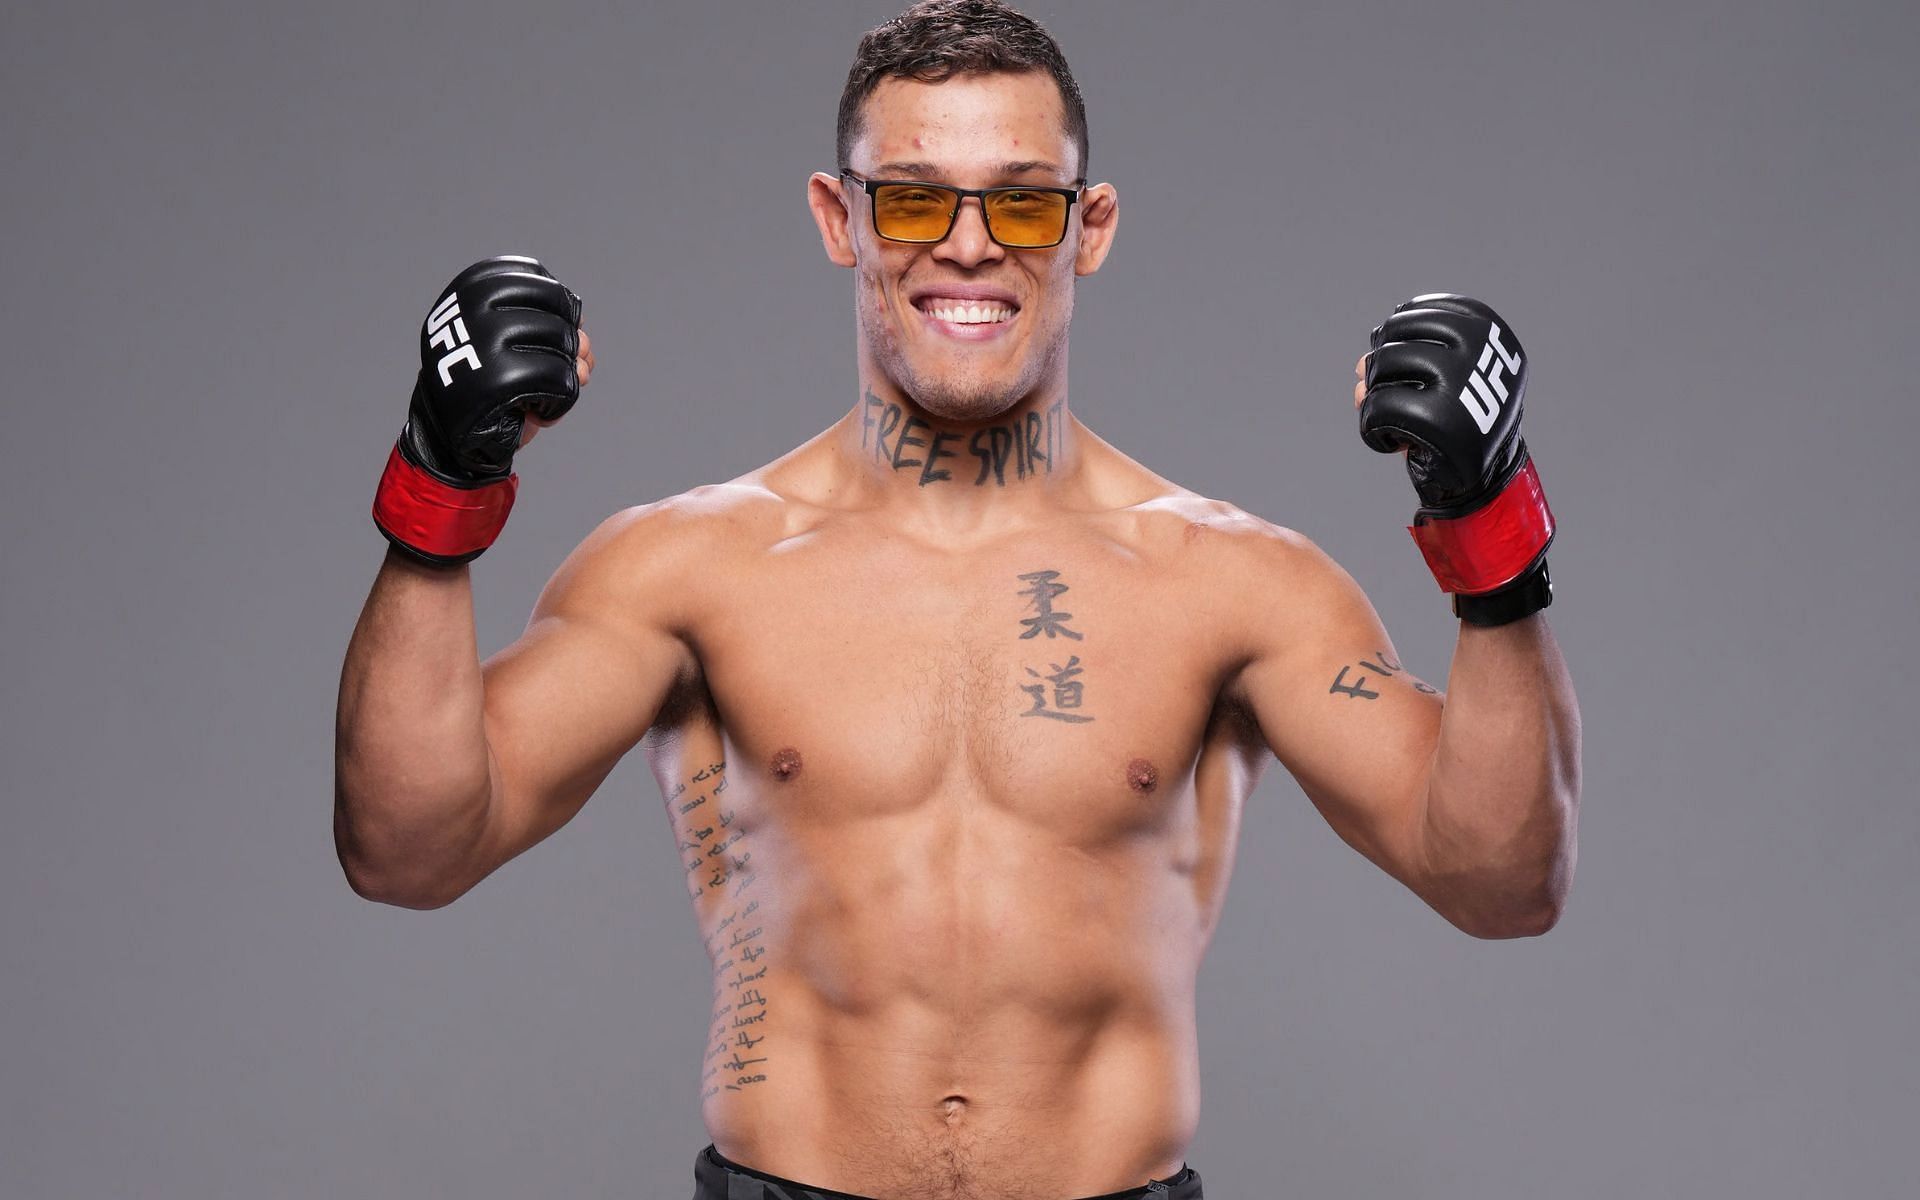 Caio Borralho competes as a UFC middleweight [Image credits: @UFCBrasil - Twitter]